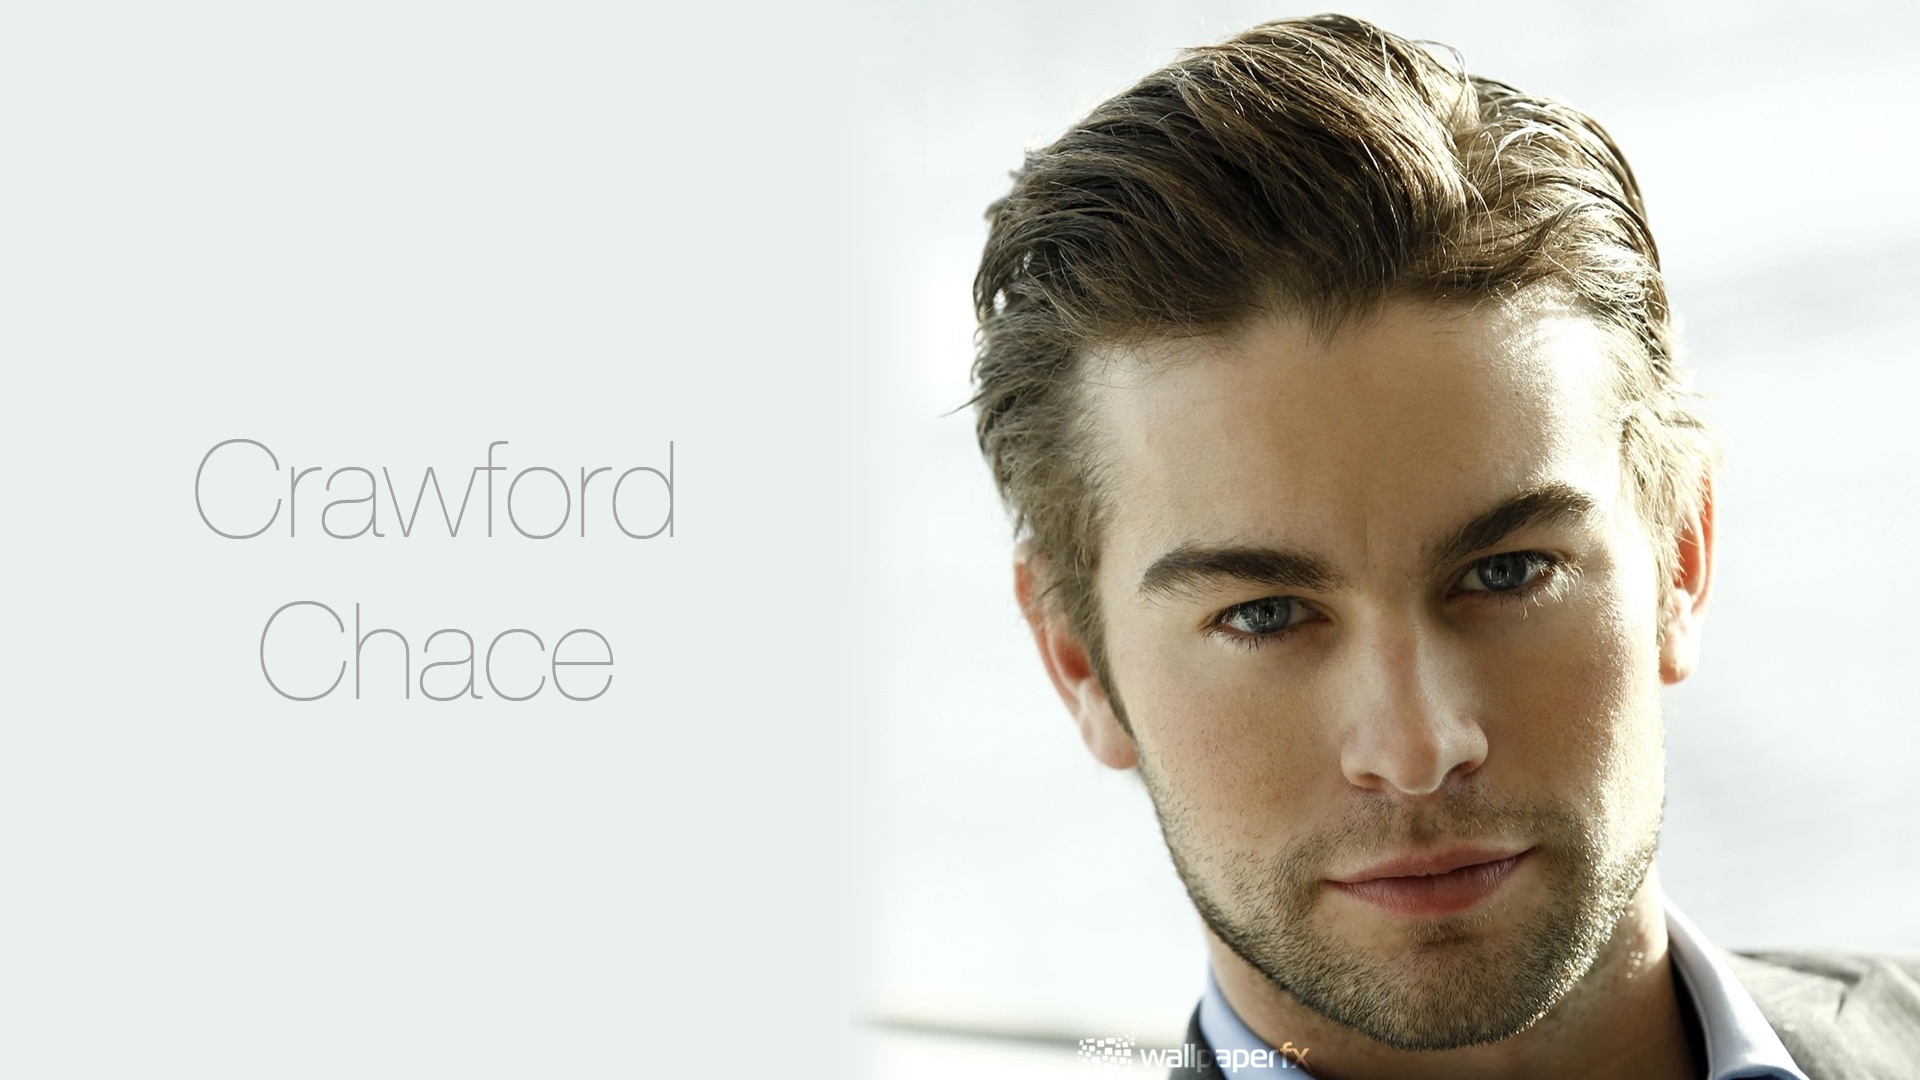 Chace Crawford Handsome High Definition Wallpaper HD